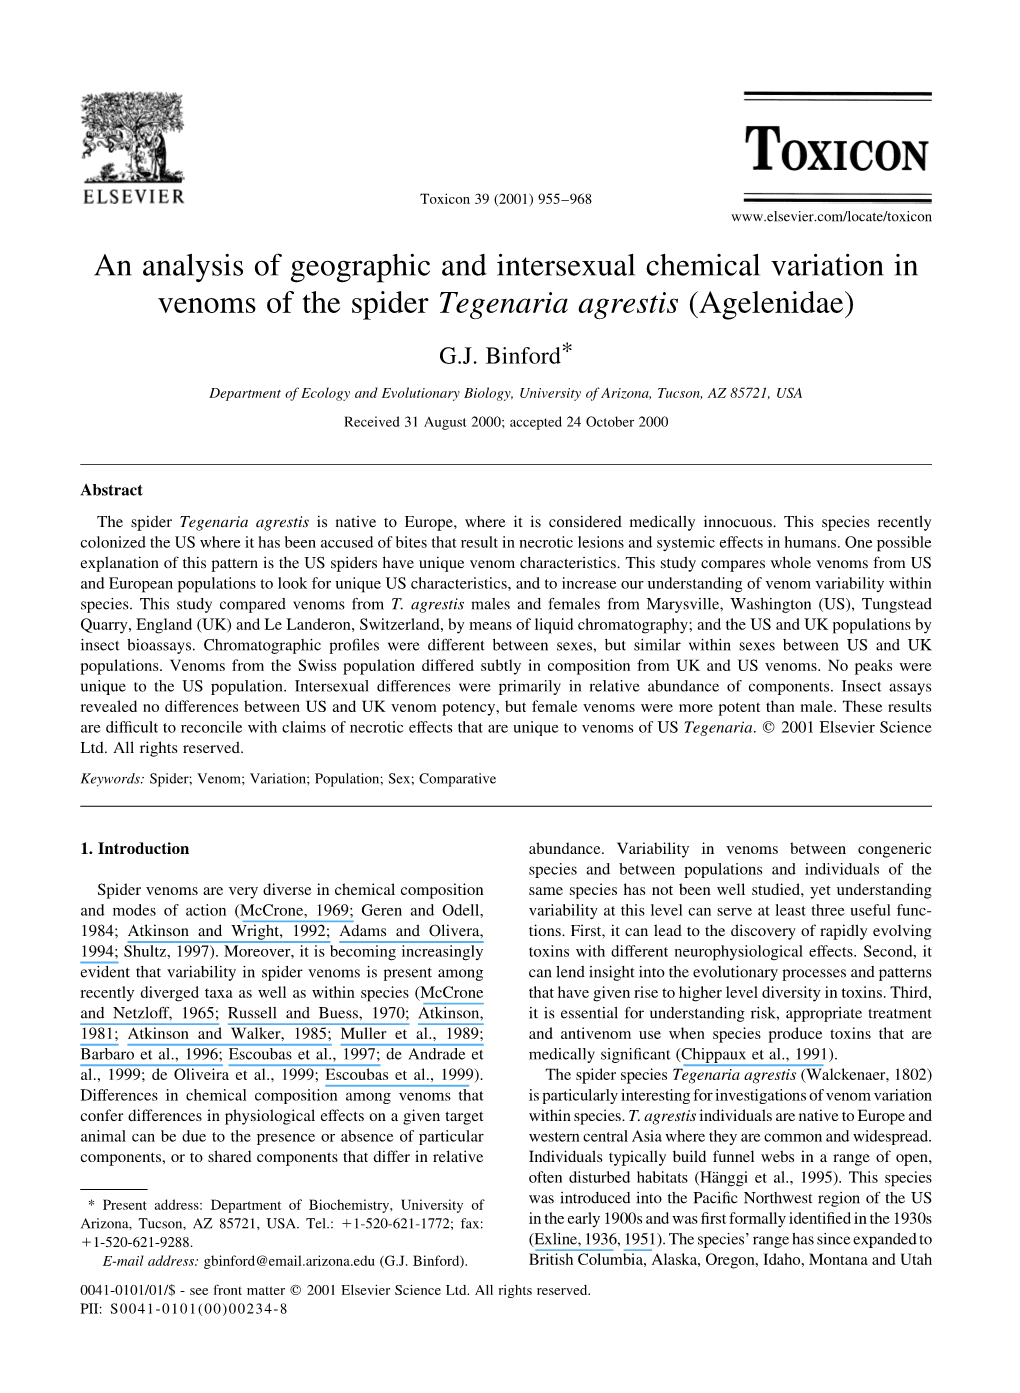 An Analysis of Geographic and Intersexual Chemical Variation in Venoms of the Spider Tegenaria Agrestis (Agelenidae)